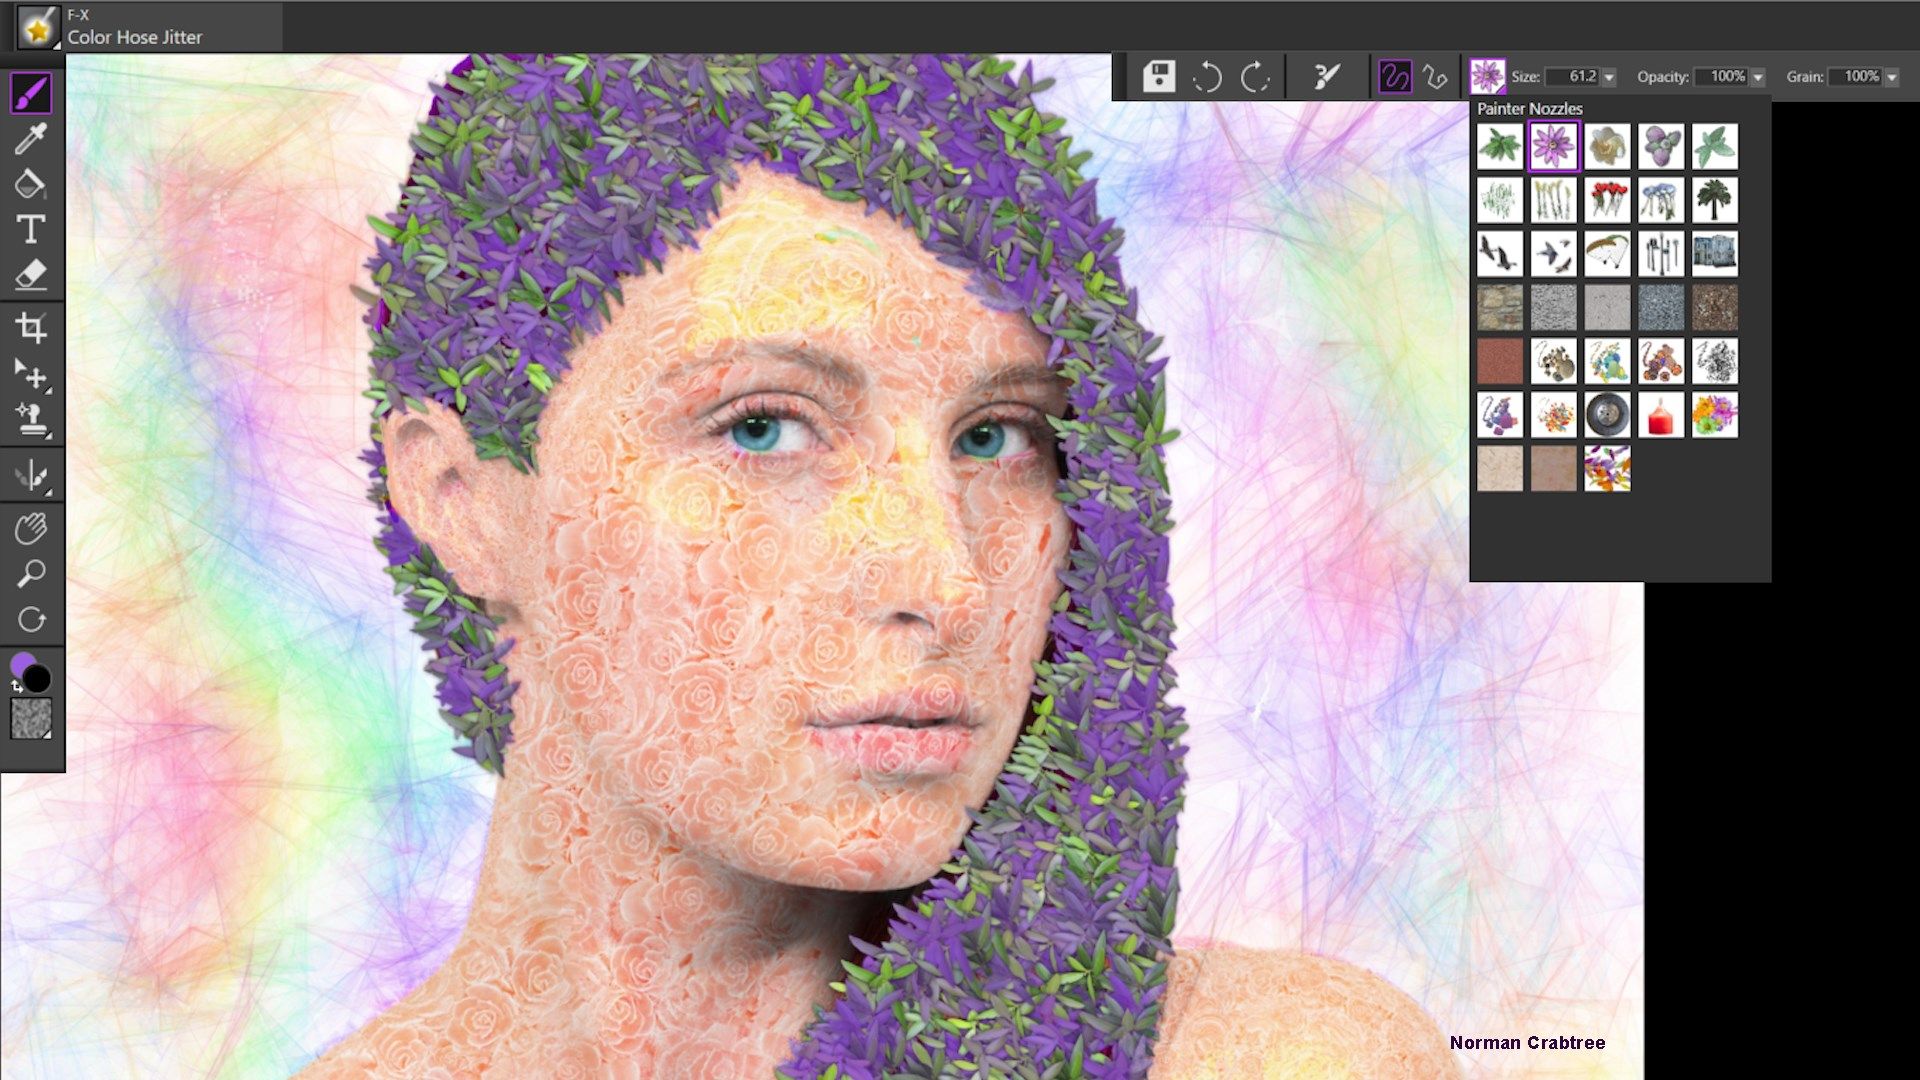 Have fun with FX brushes that spray compelling imagery on your photos, distort brush strokes and add cool effects